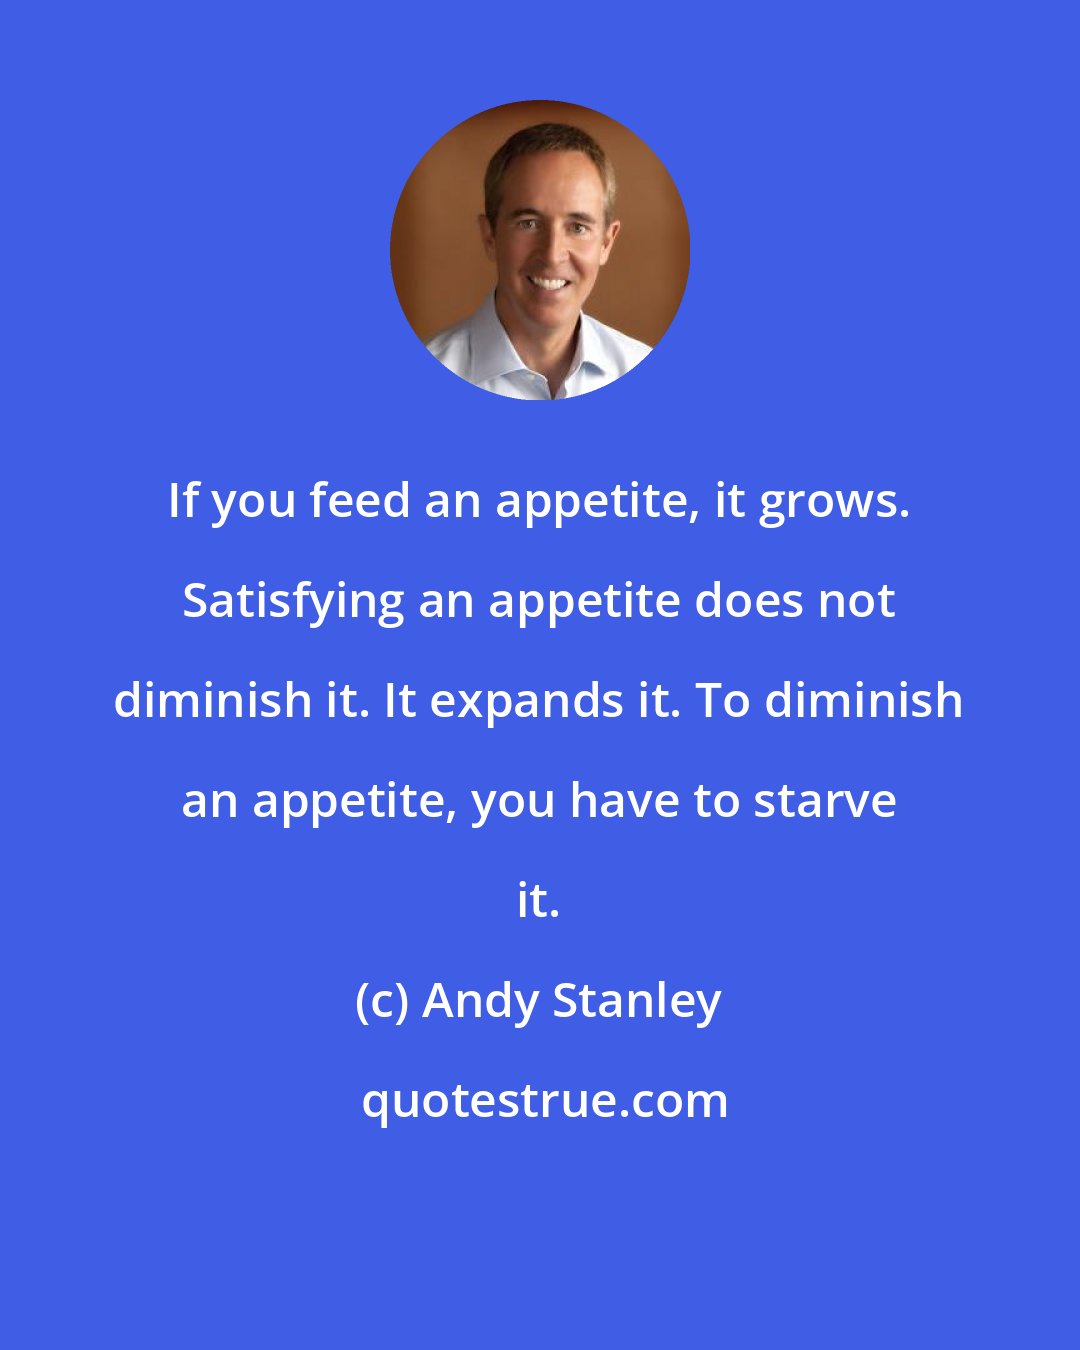 Andy Stanley: If you feed an appetite, it grows. Satisfying an appetite does not diminish it. It expands it. To diminish an appetite, you have to starve it.